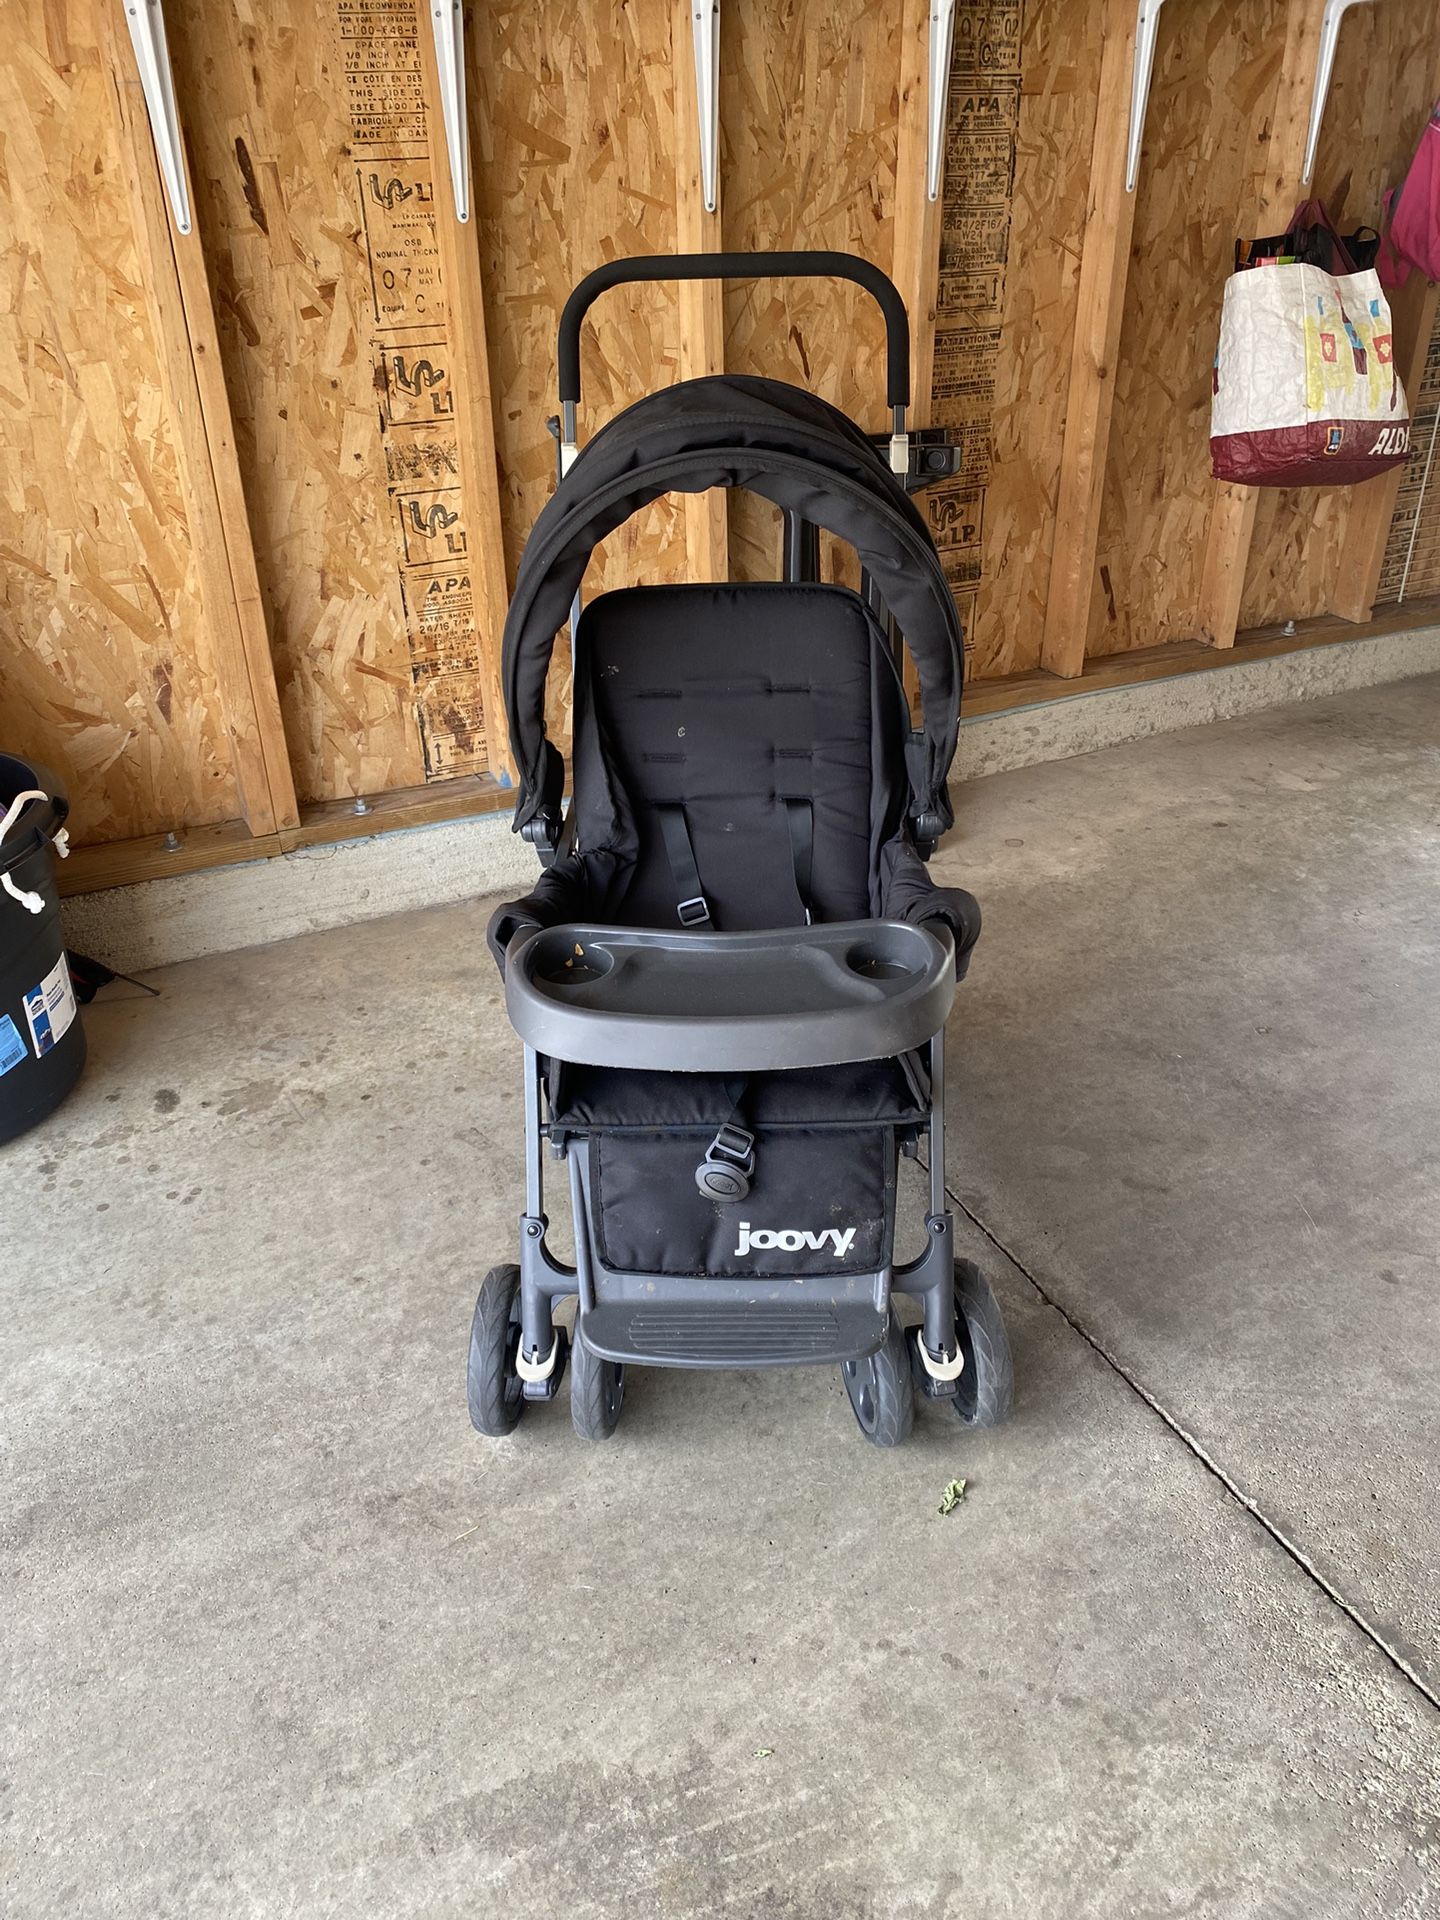 Sit & Stand Joovy Double Stroller